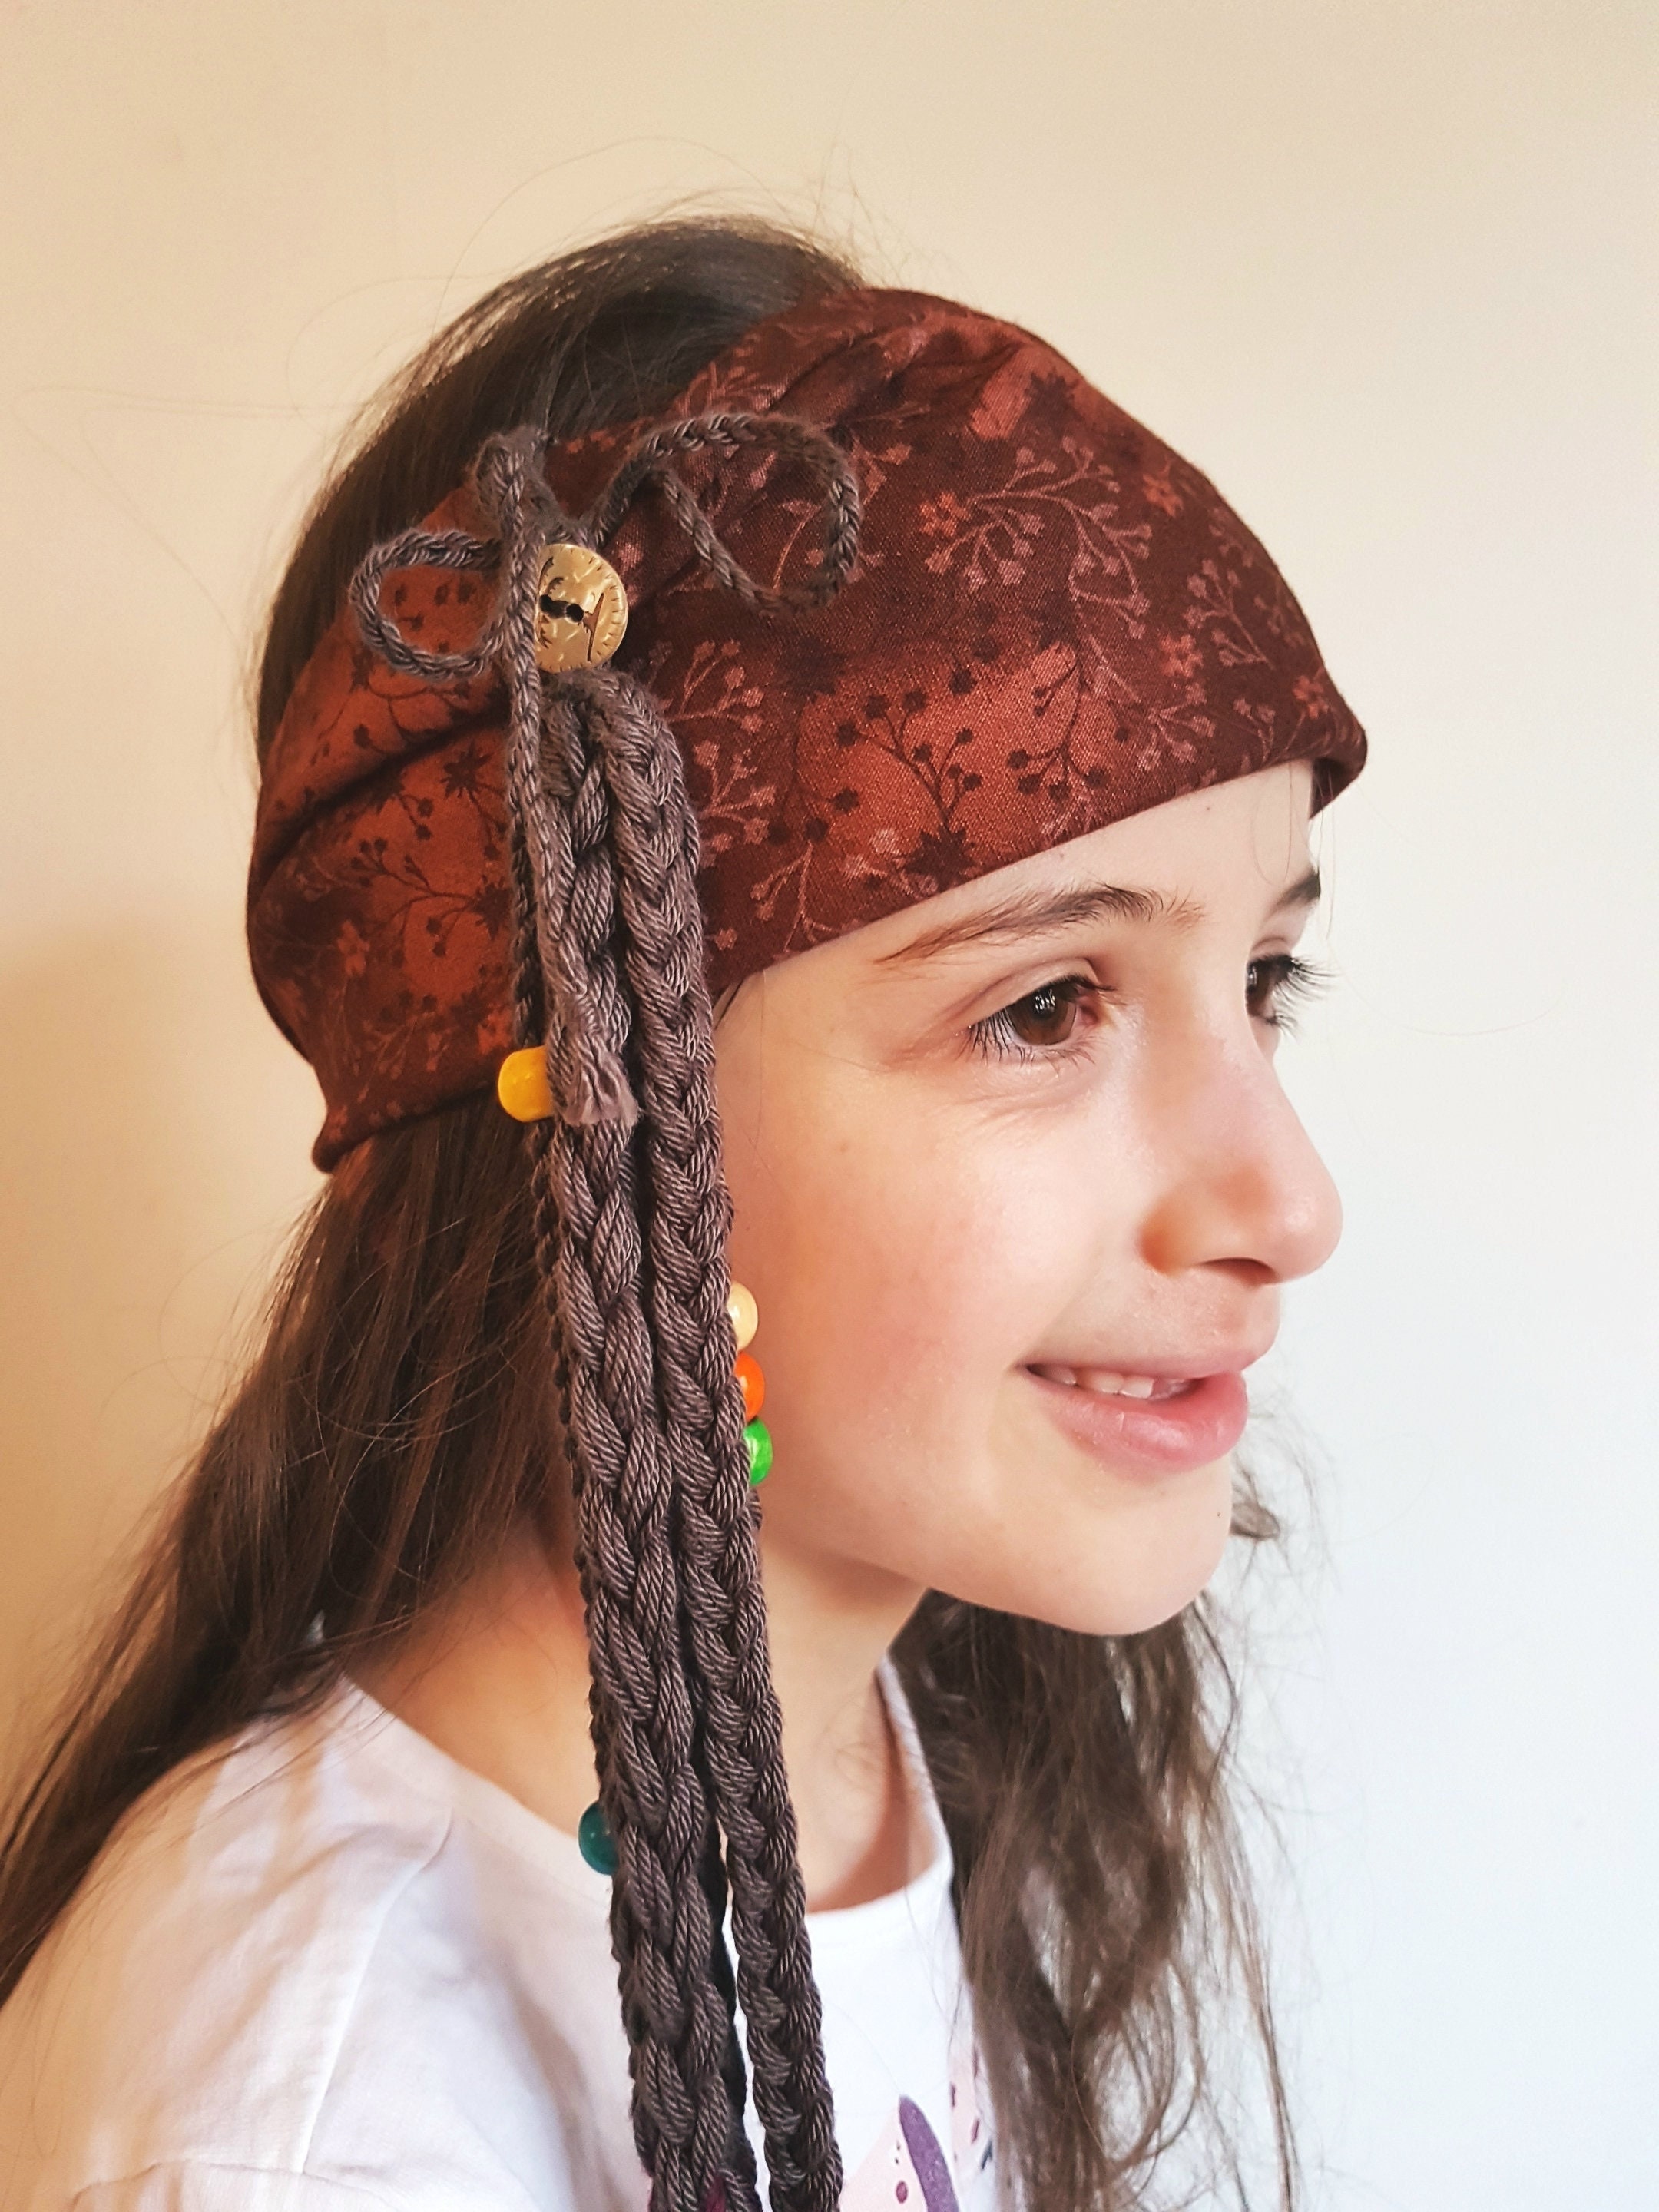 Kids Pirate Hair Accessory for Dressing Up. Pirates of the Caribbean. 100%  Cotton & Wooden Beads -  Finland